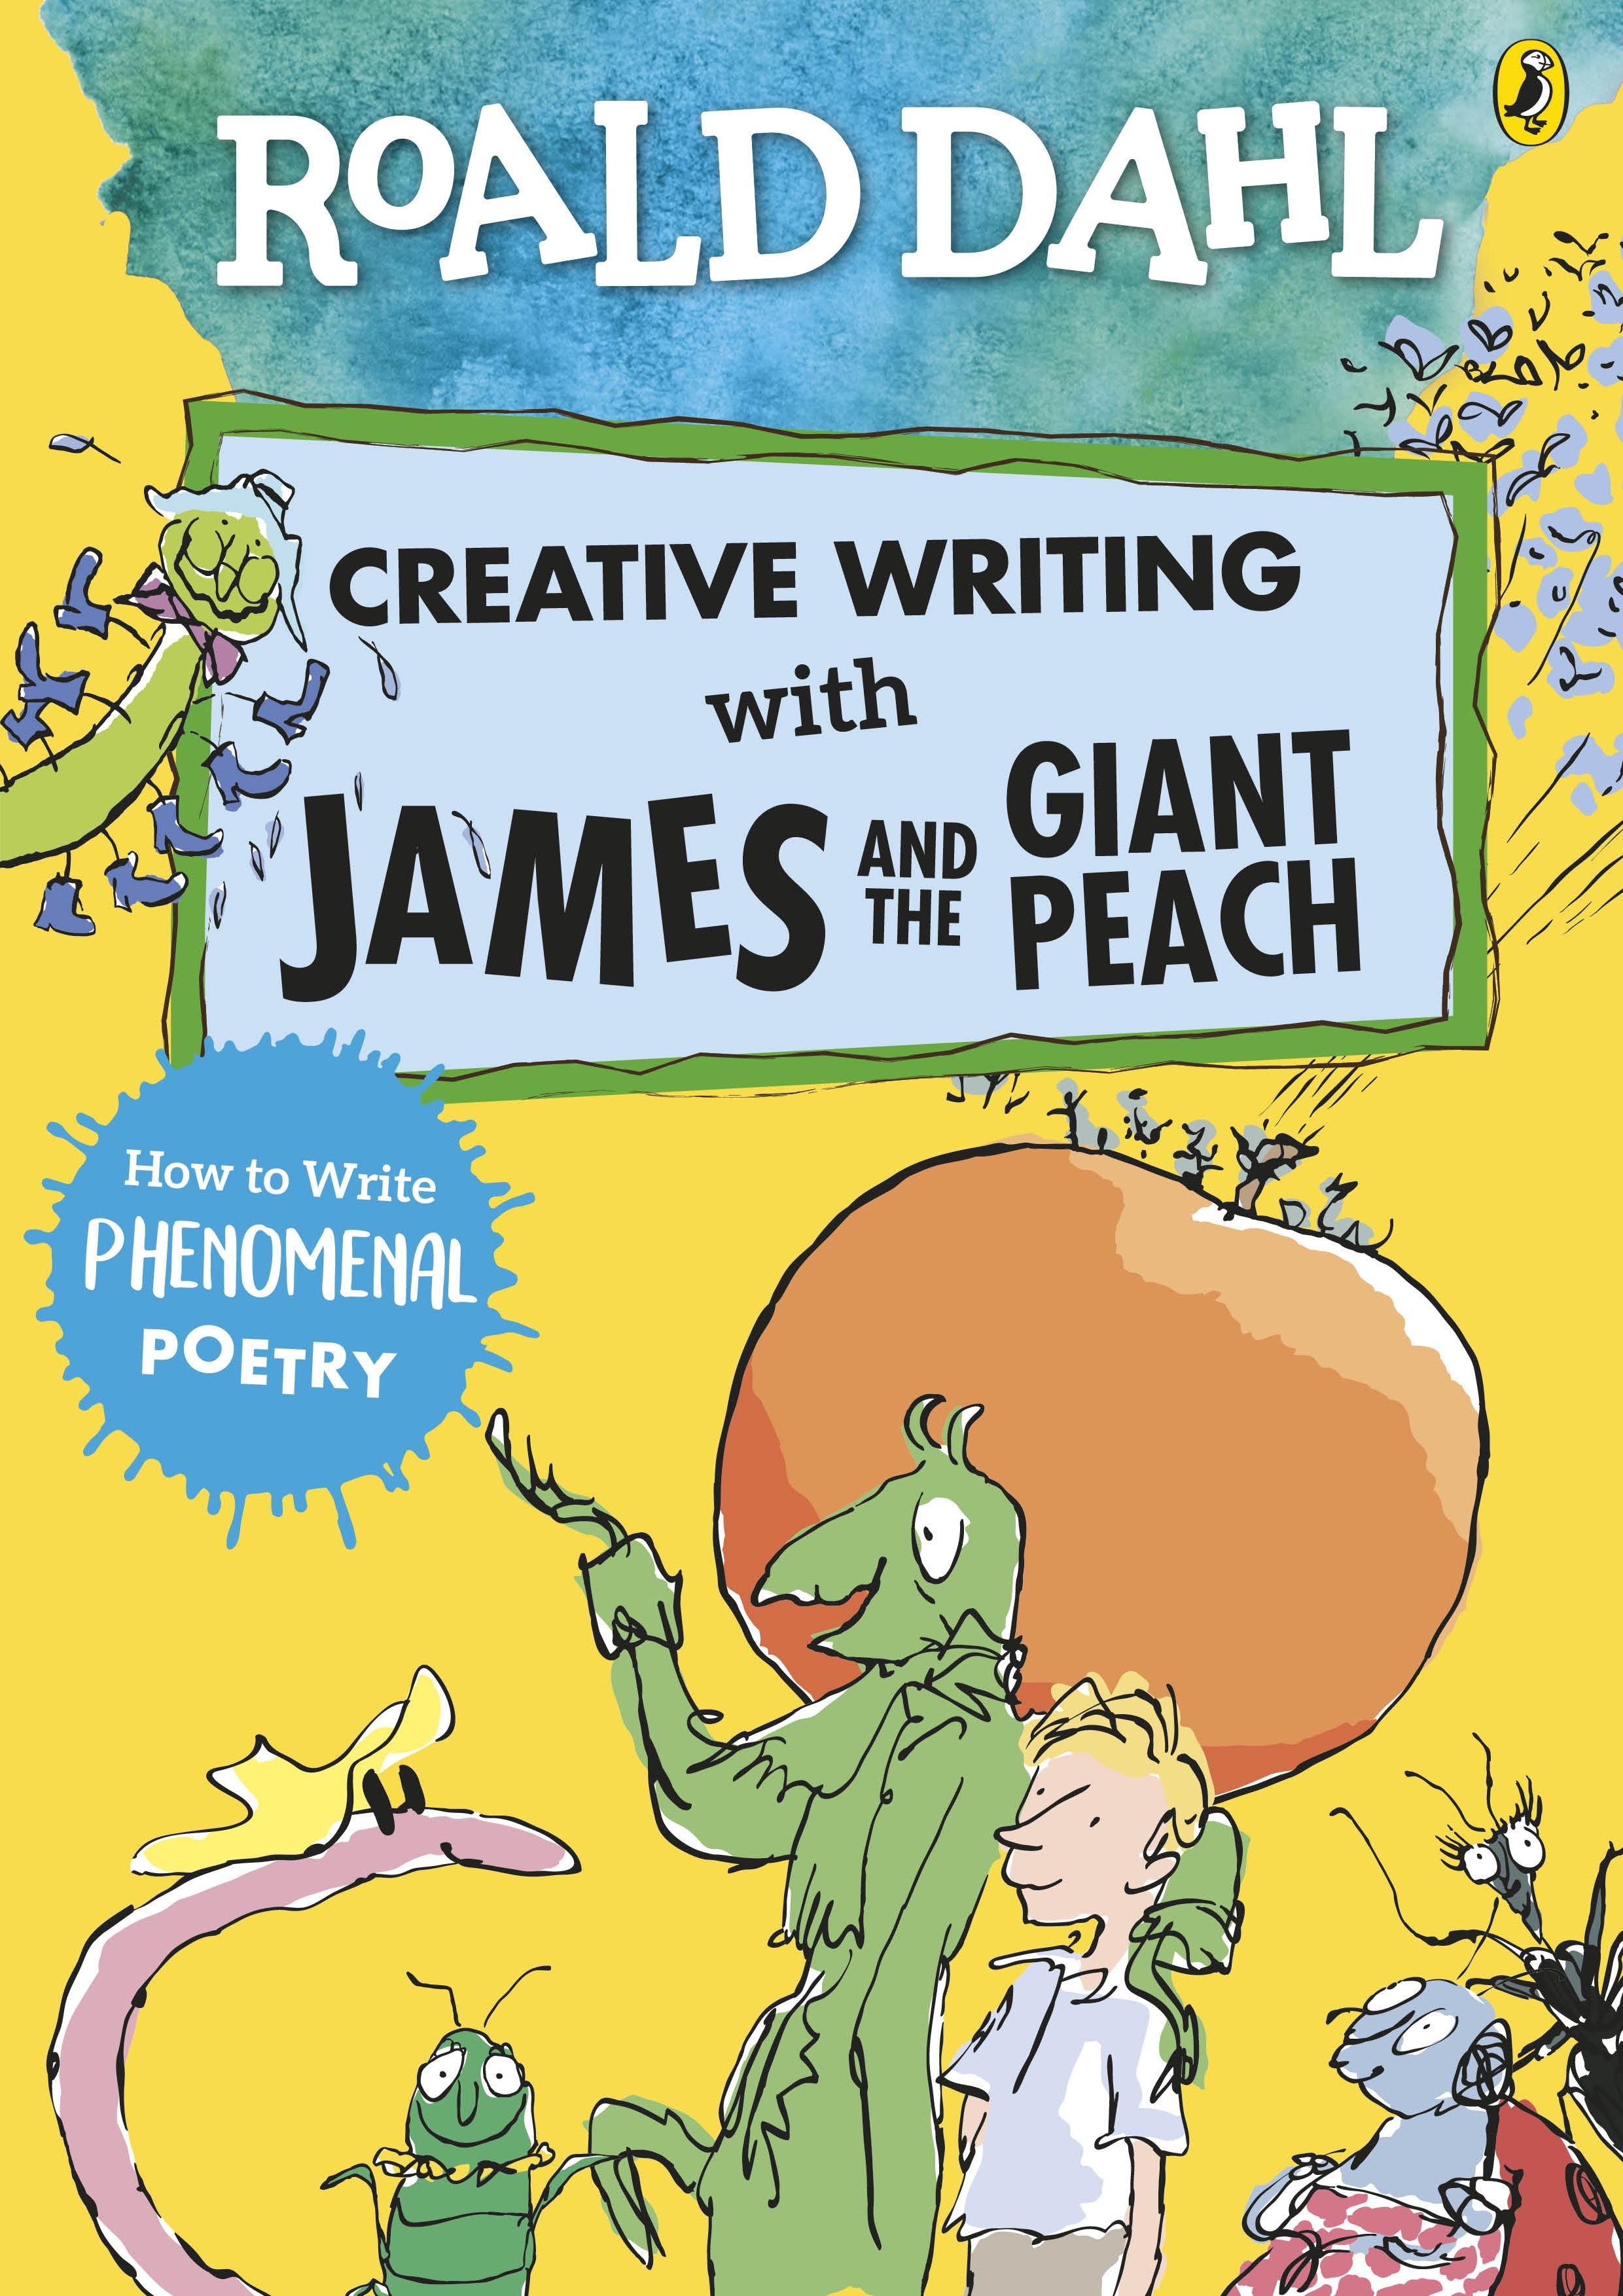 Book “Roald Dahl Creative Writing with James and the Giant Peach: How to Write Phenomenal Poetry” by Roald Dahl — January 23, 2020